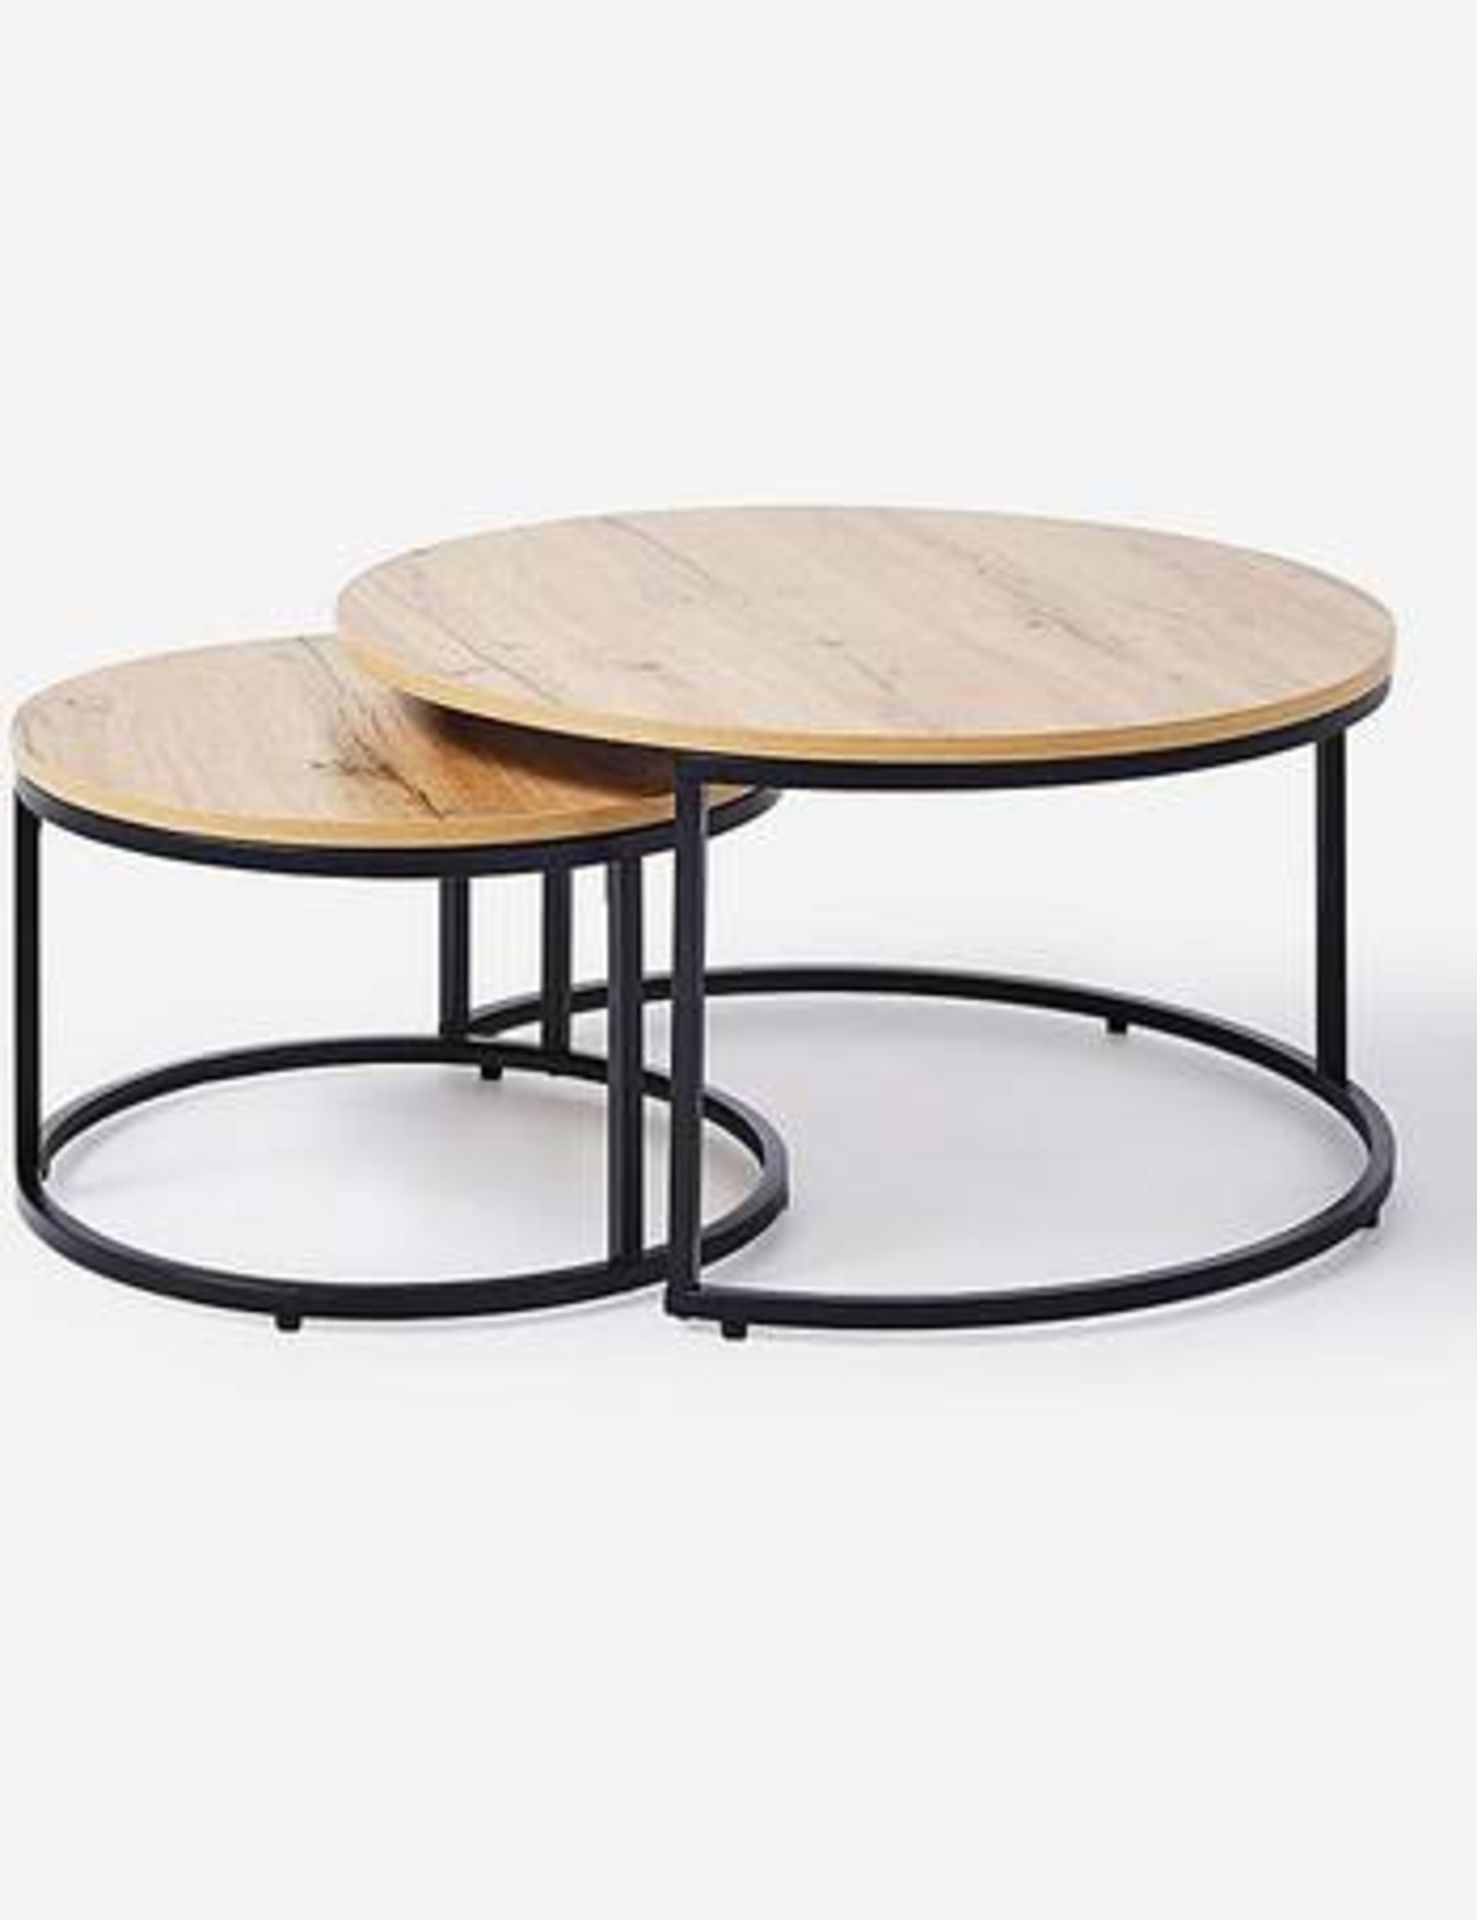 Shoreditch Nest of Coffee Tables. - ER26.